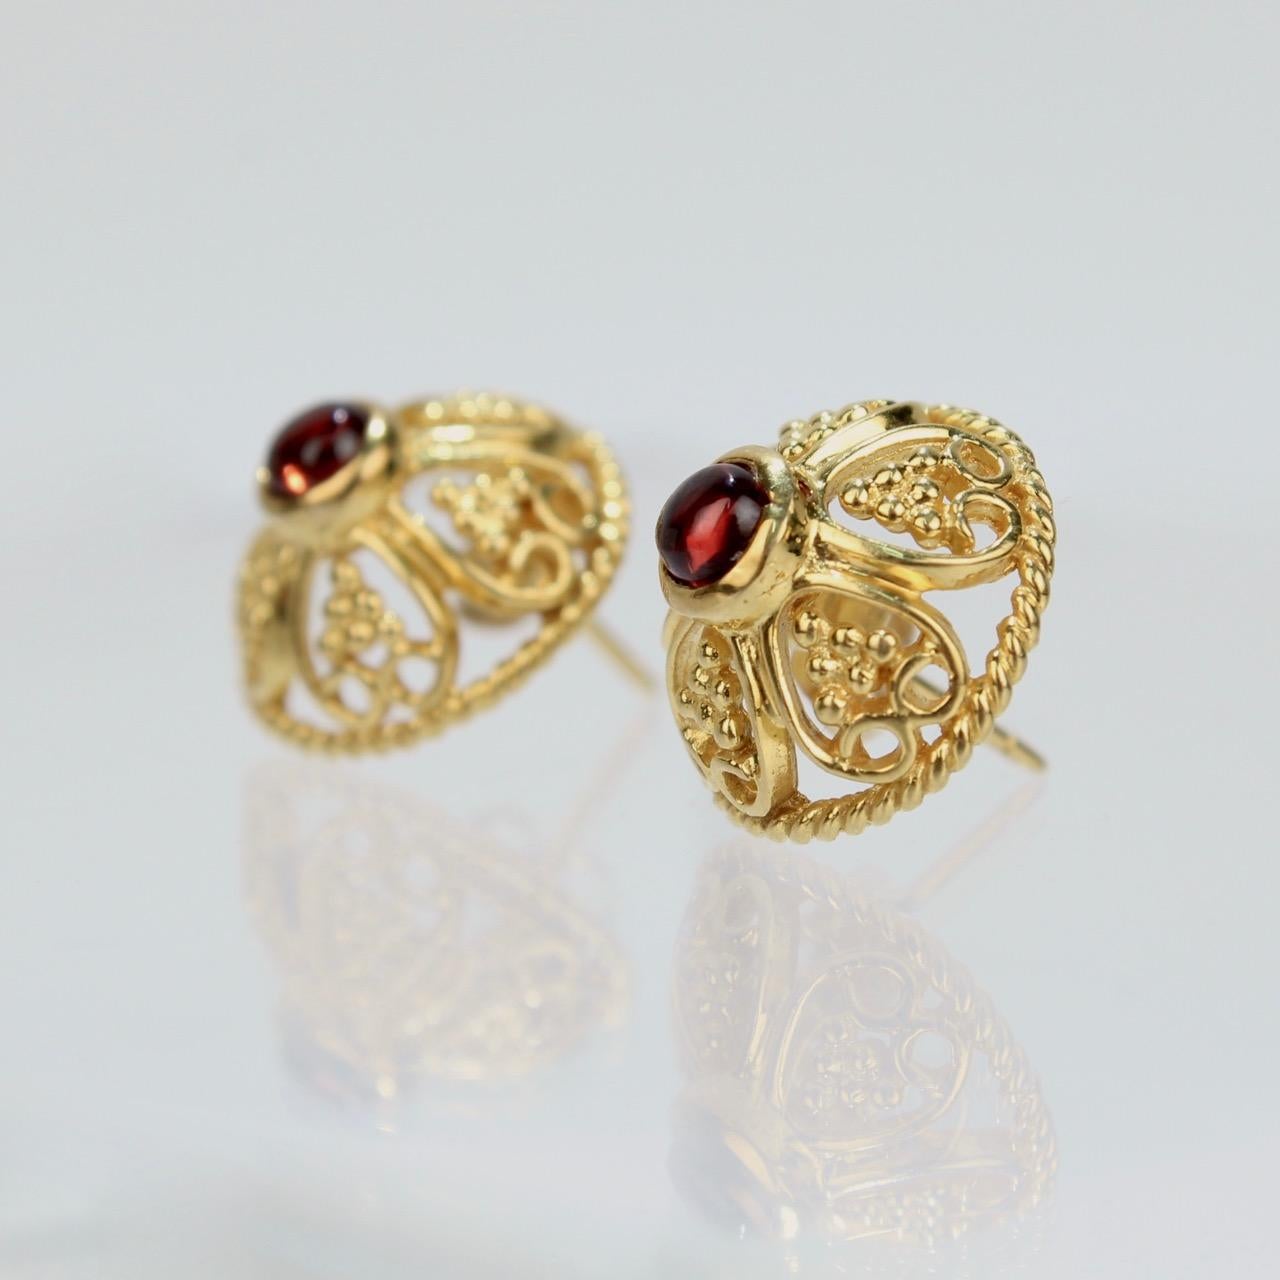 A wonderful pair of Renaissance style earrings.

With bezel-set oval garnet cabochons in 14K gold with filigree decoration.

Originally sold in the MMA gift store, as one of their top quality, period-inspired pieces. 

Marked 585/14k for gold